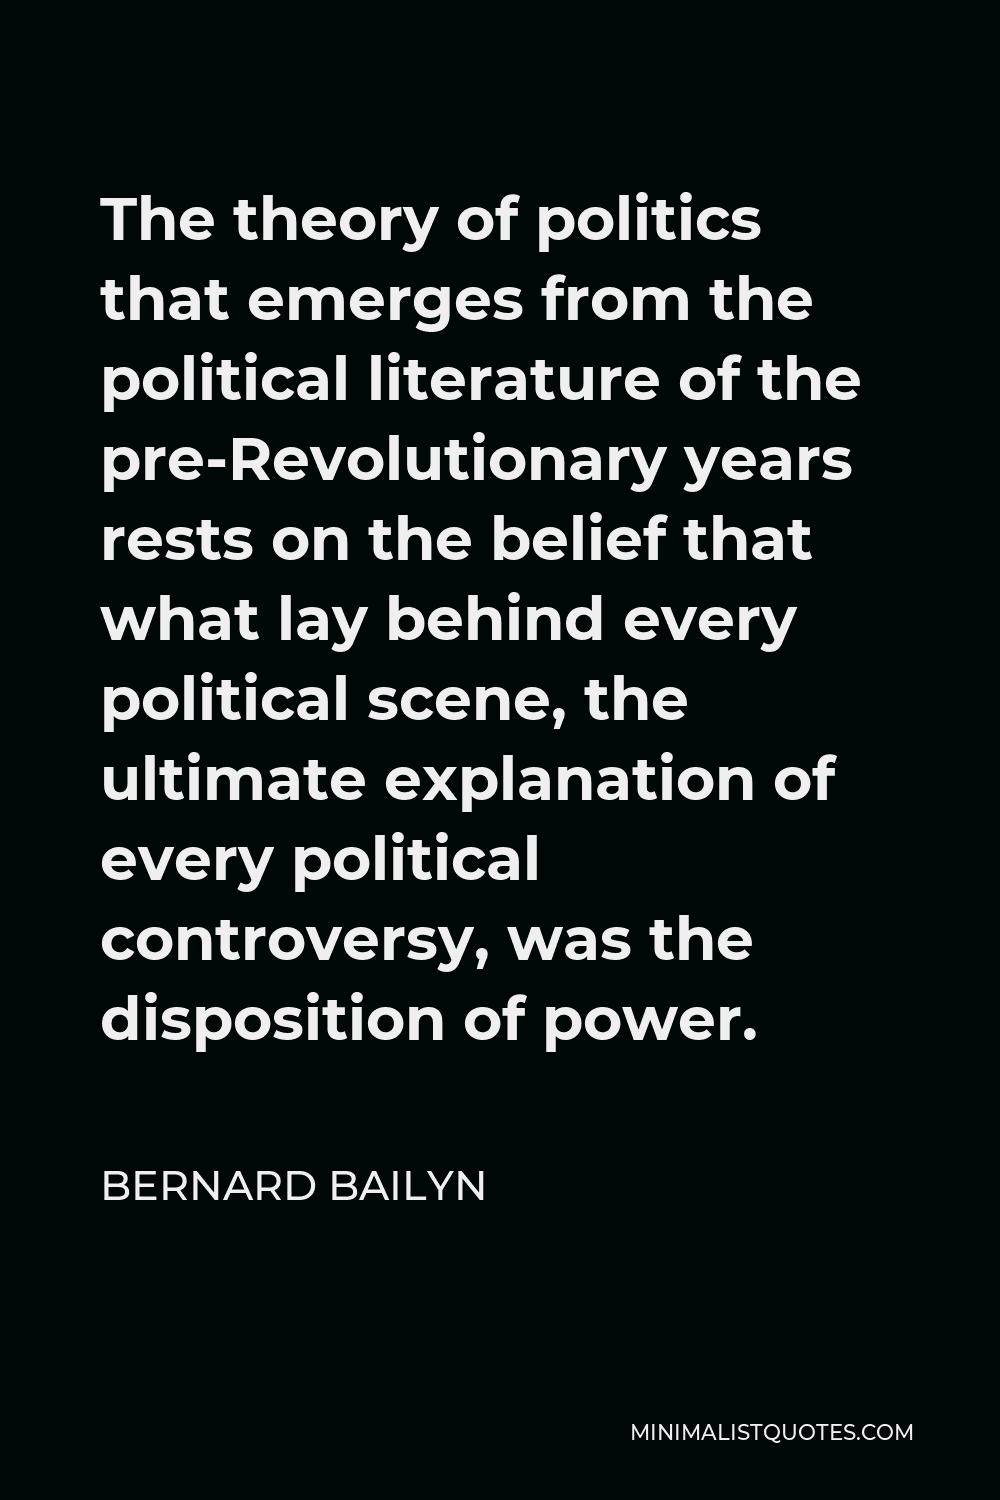 Bernard Bailyn Quote - The theory of politics that emerges from the political literature of the pre-Revolutionary years rests on the belief that what lay behind every political scene, the ultimate explanation of every political controversy, was the disposition of power.